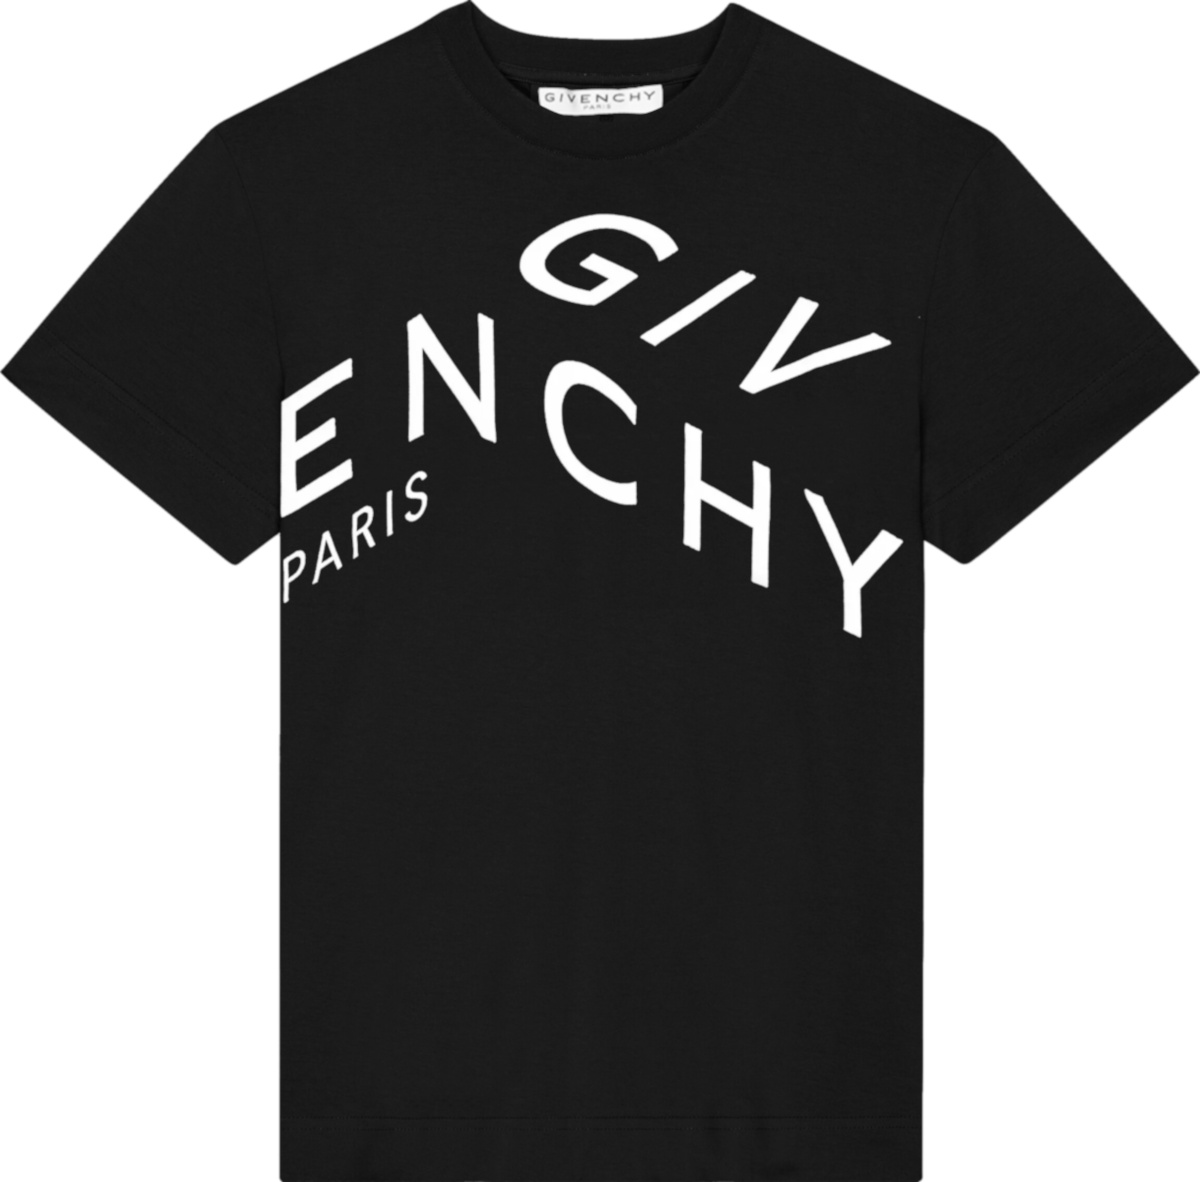 Givenchy Black Refracted Logo T-Shirt | INC STYLE